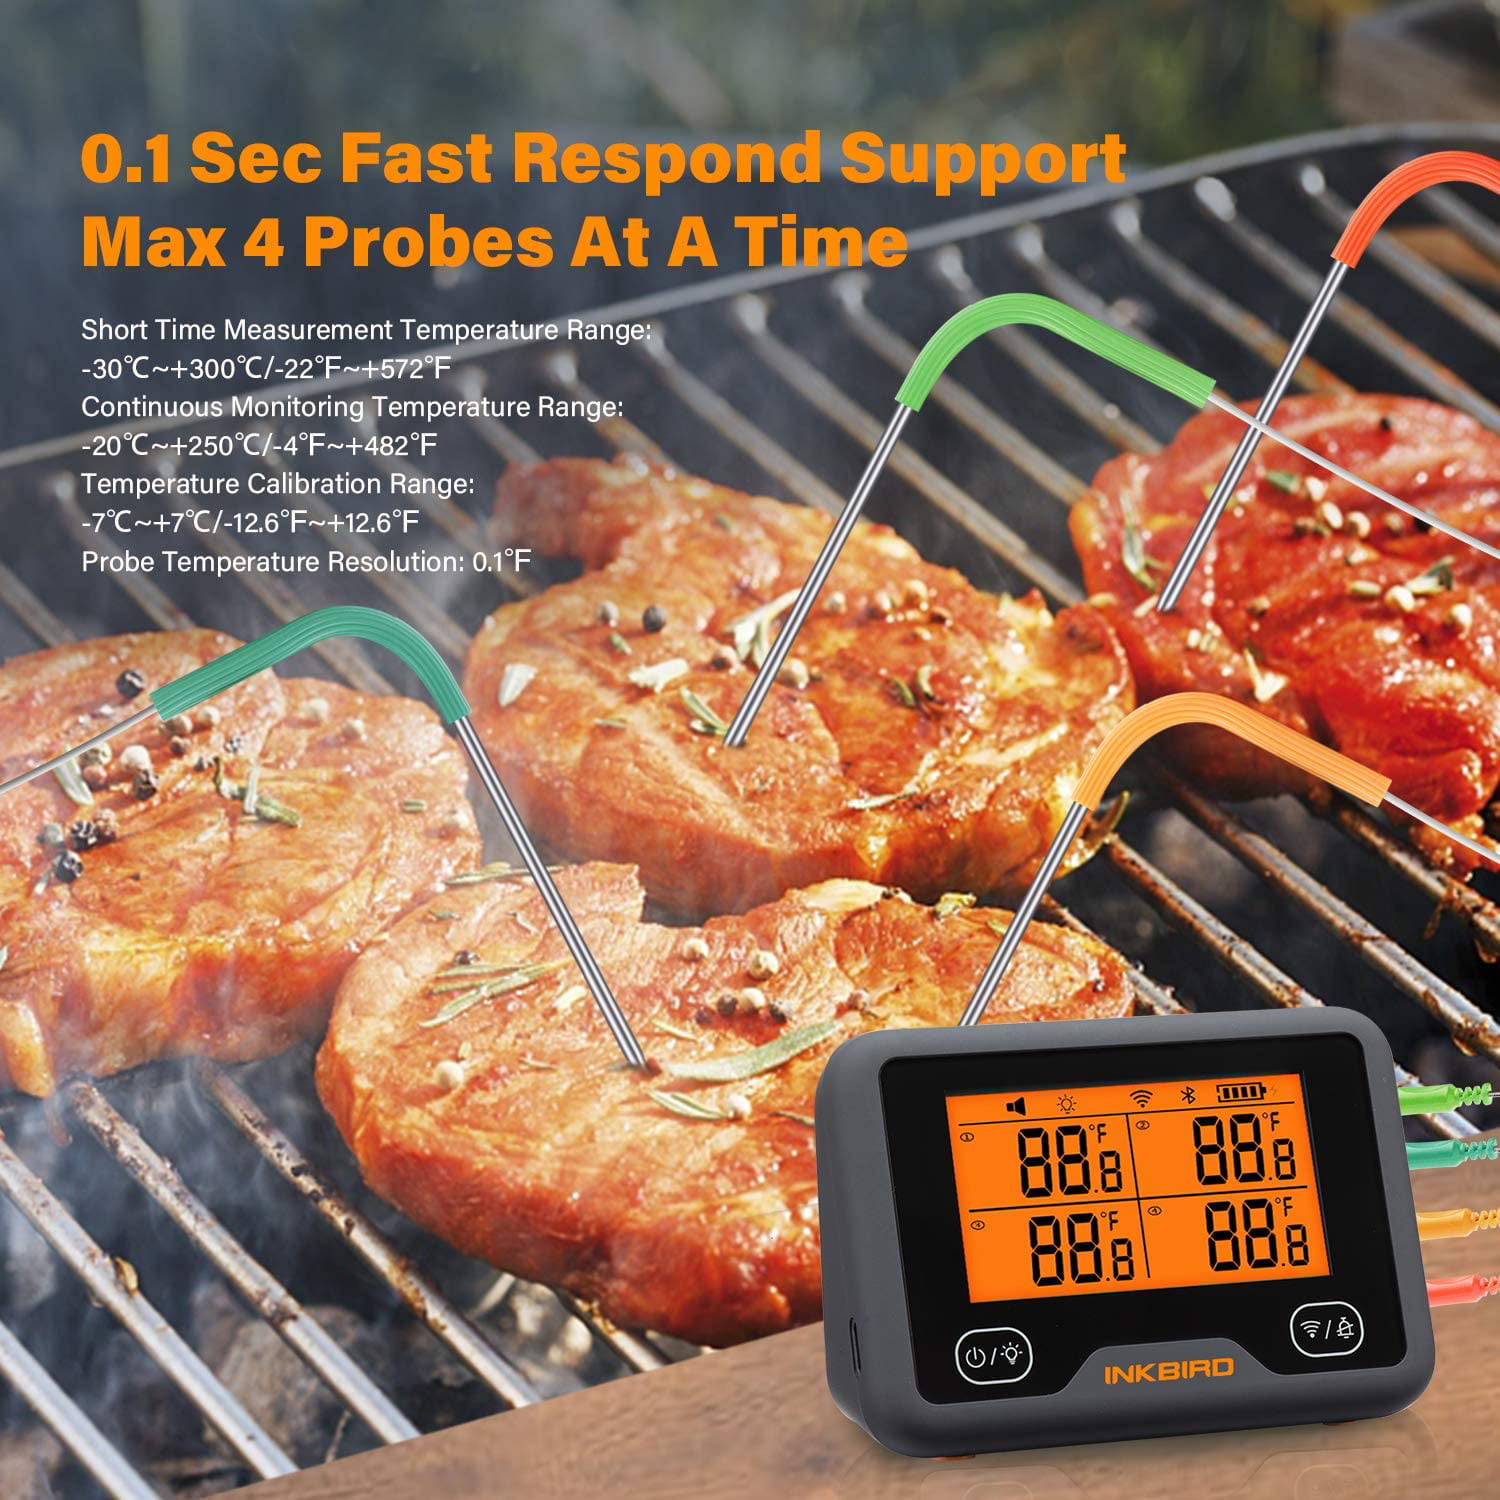 Inkbird Wifi Grill Meat Thermometer IBBQ-4T with 4 Colored Probes, Wireless  Bar